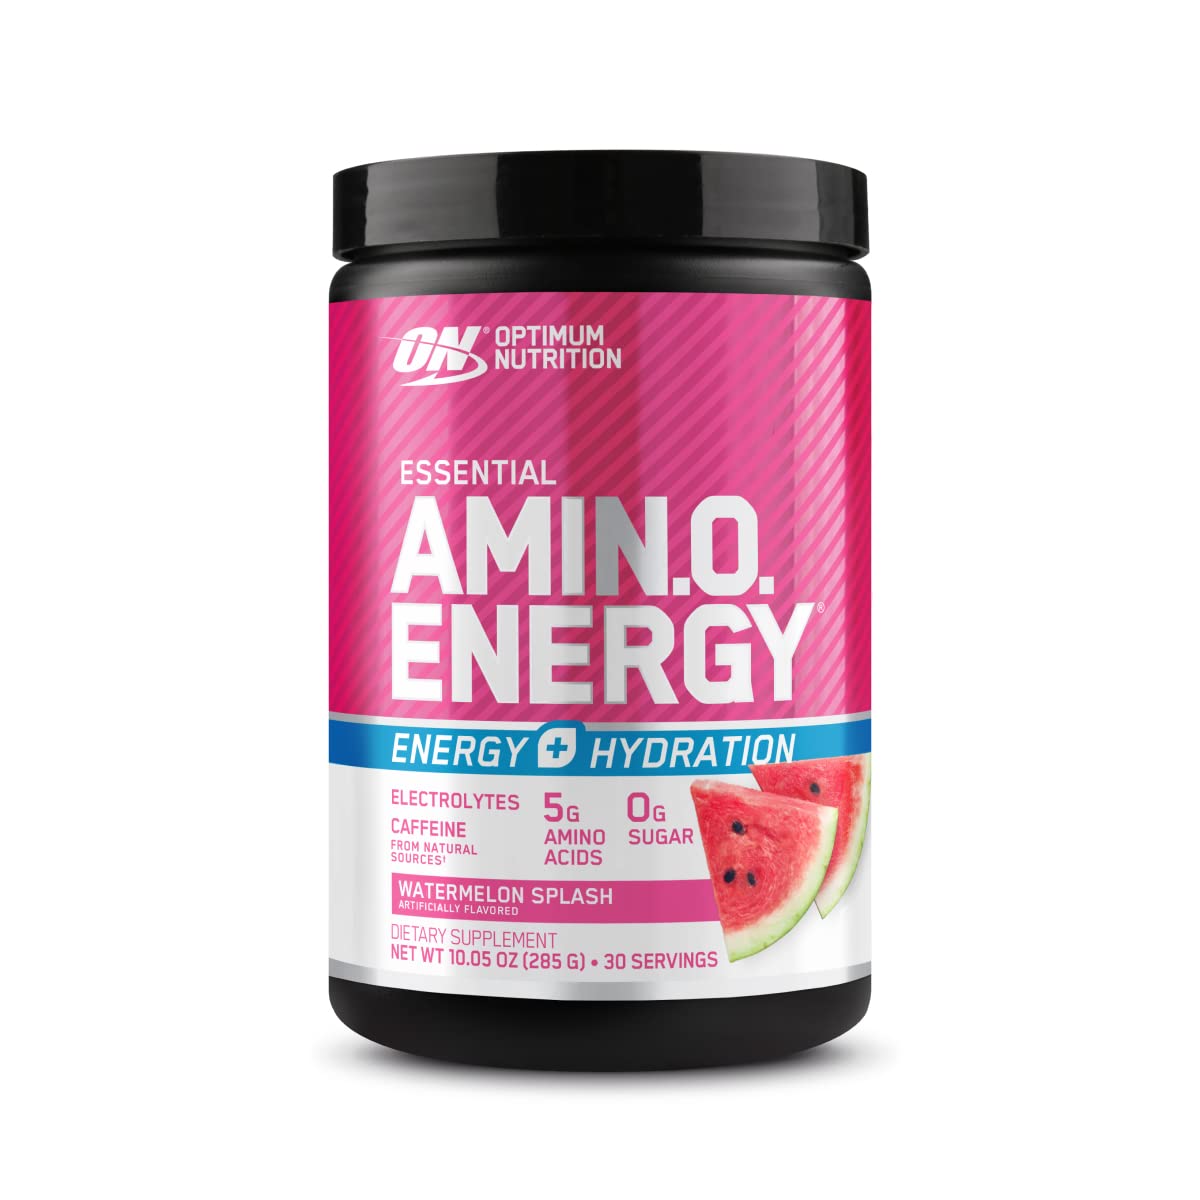 Optimum Nutrition Amino Energy Plus Electrolytes Energy Drink Powder, Caffeine for Pre-Workout Energy and Amino Acids/BCAAs for Post-Workout Recovery, Watermelon Splash, 10.5 Ounces (30 Servings)